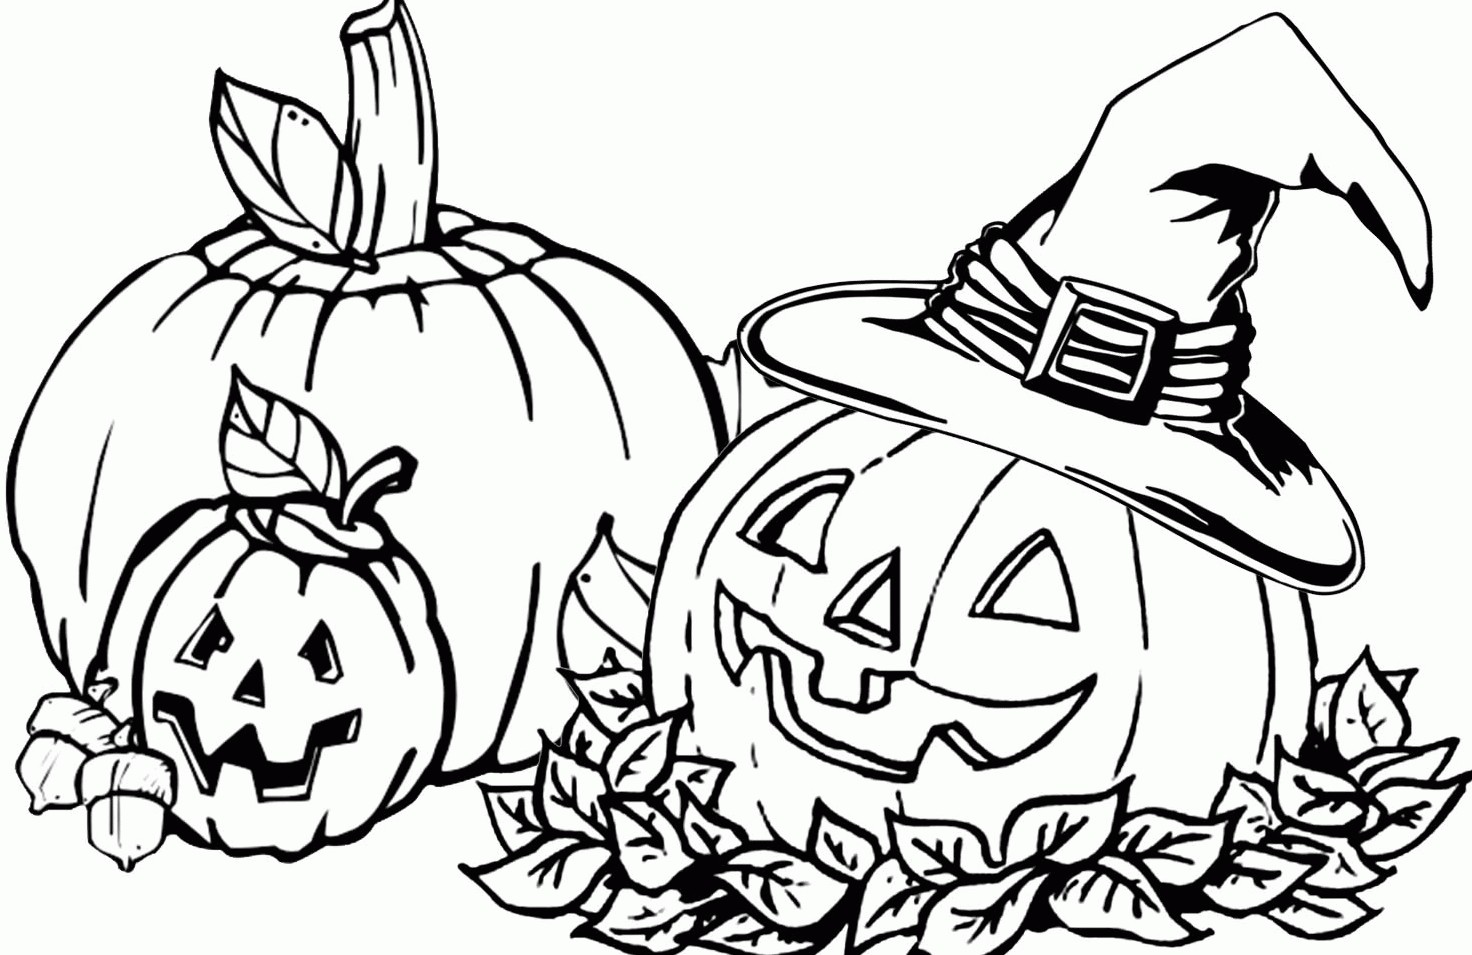 Free Pumpkin Patch Coloring Pages Printable, Download Free Clip Art